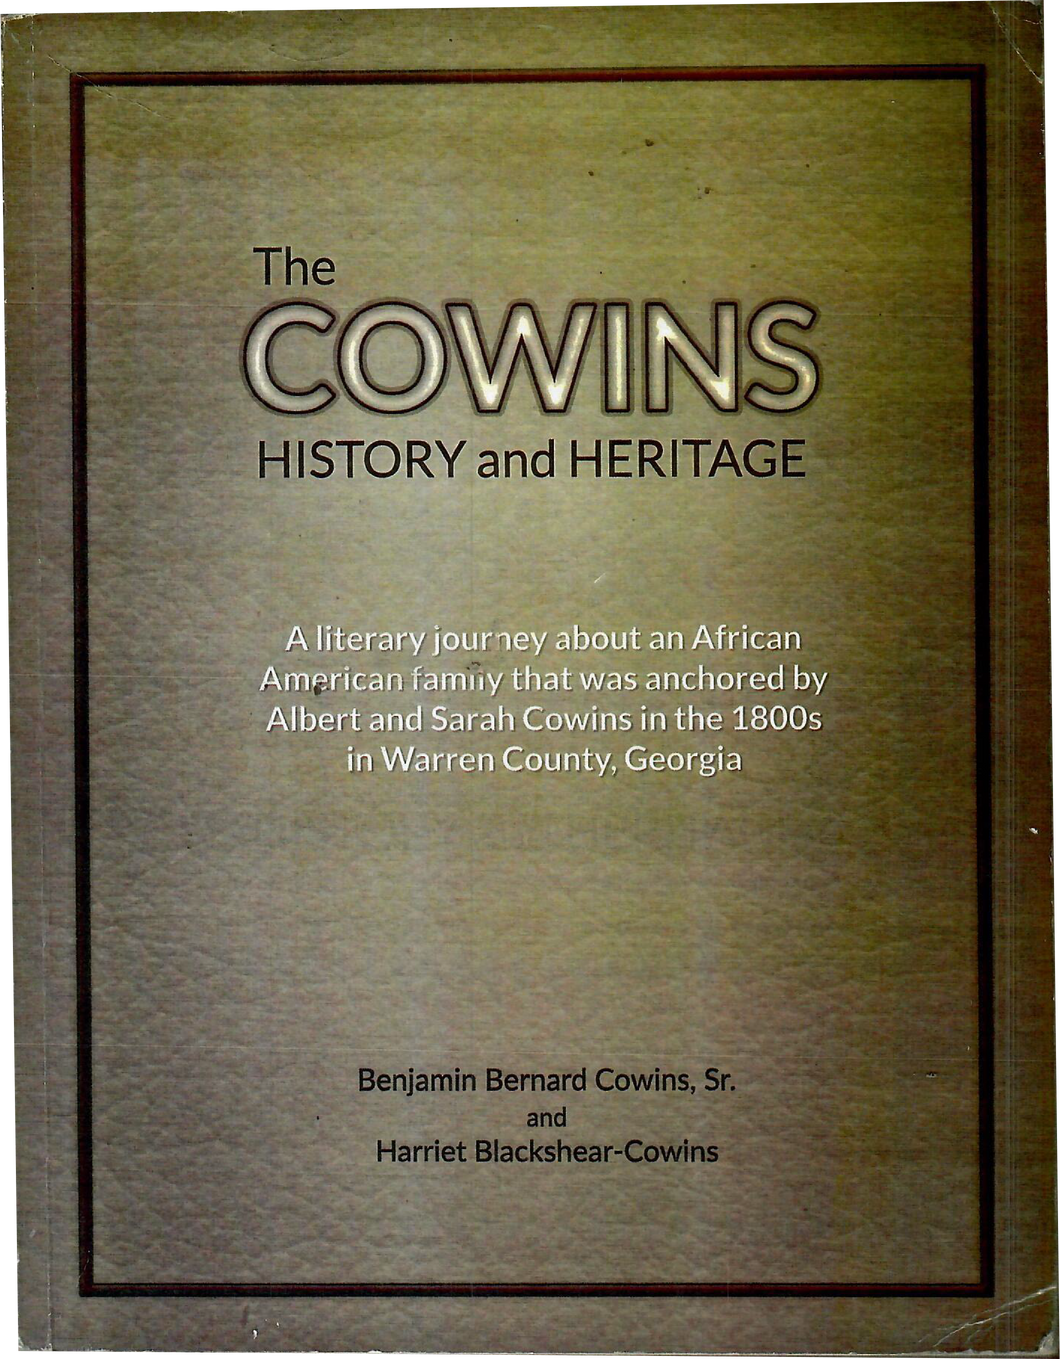 The Cowins History and Heritage (paperback)